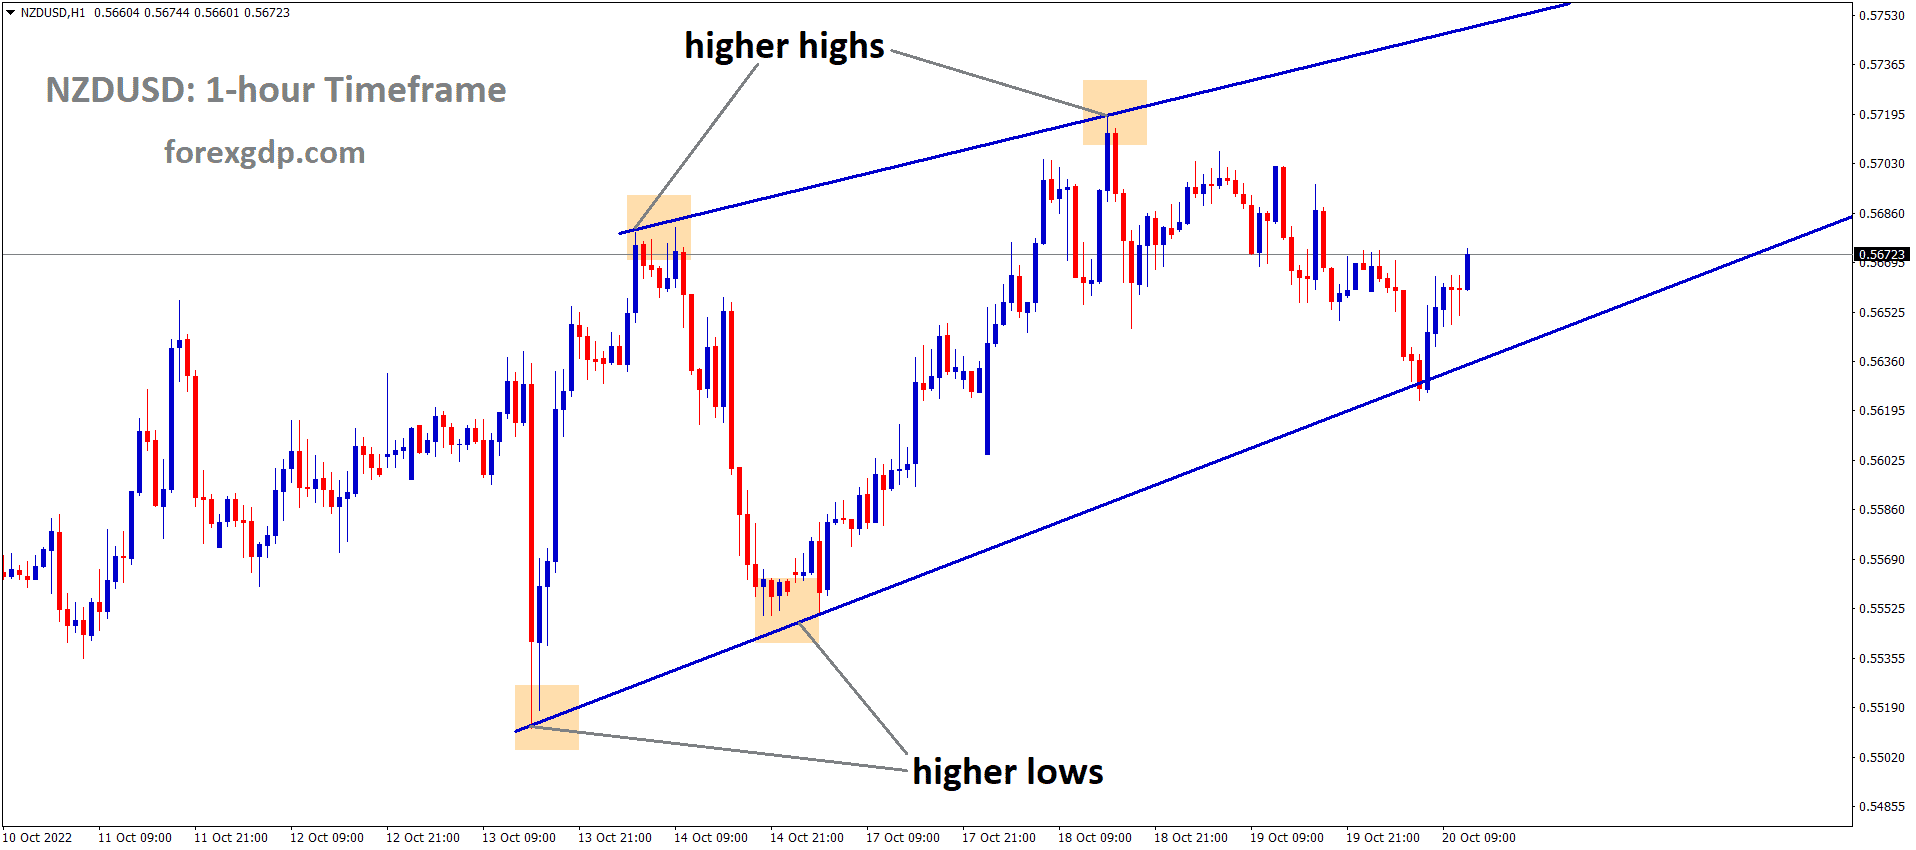 NZDUSD is moving in the Rising wedge pattern and the market has rebounded from the higher low area of the pattern